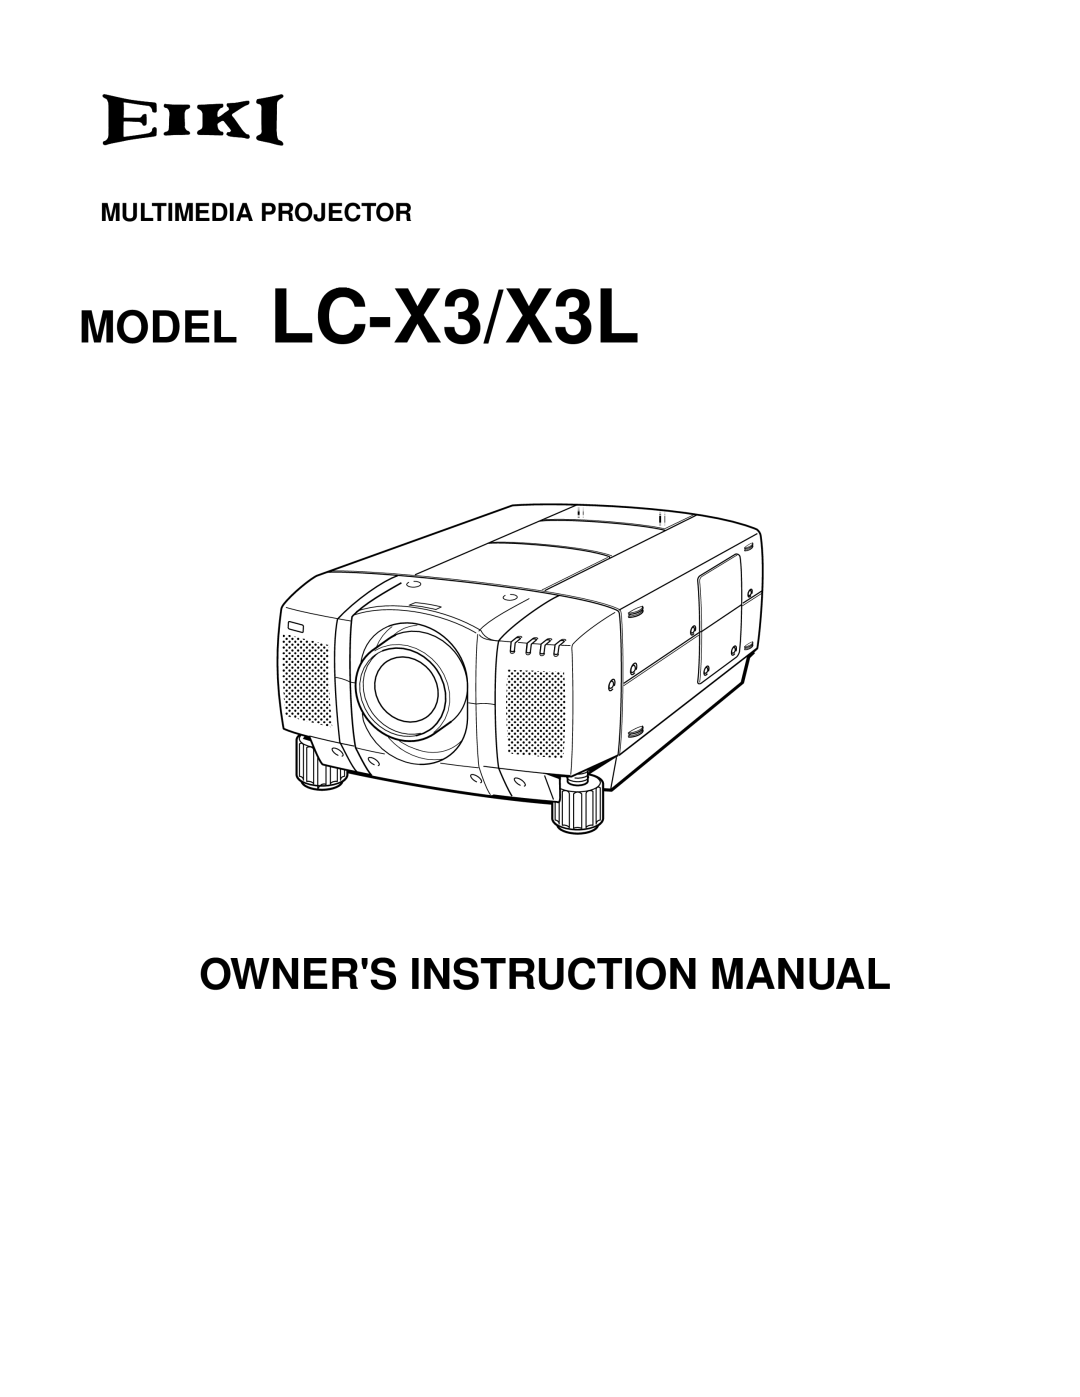 Eiki instruction manual Multimedia Projector, MODEL LC-X3/X3L, Owners Instruction Manual 